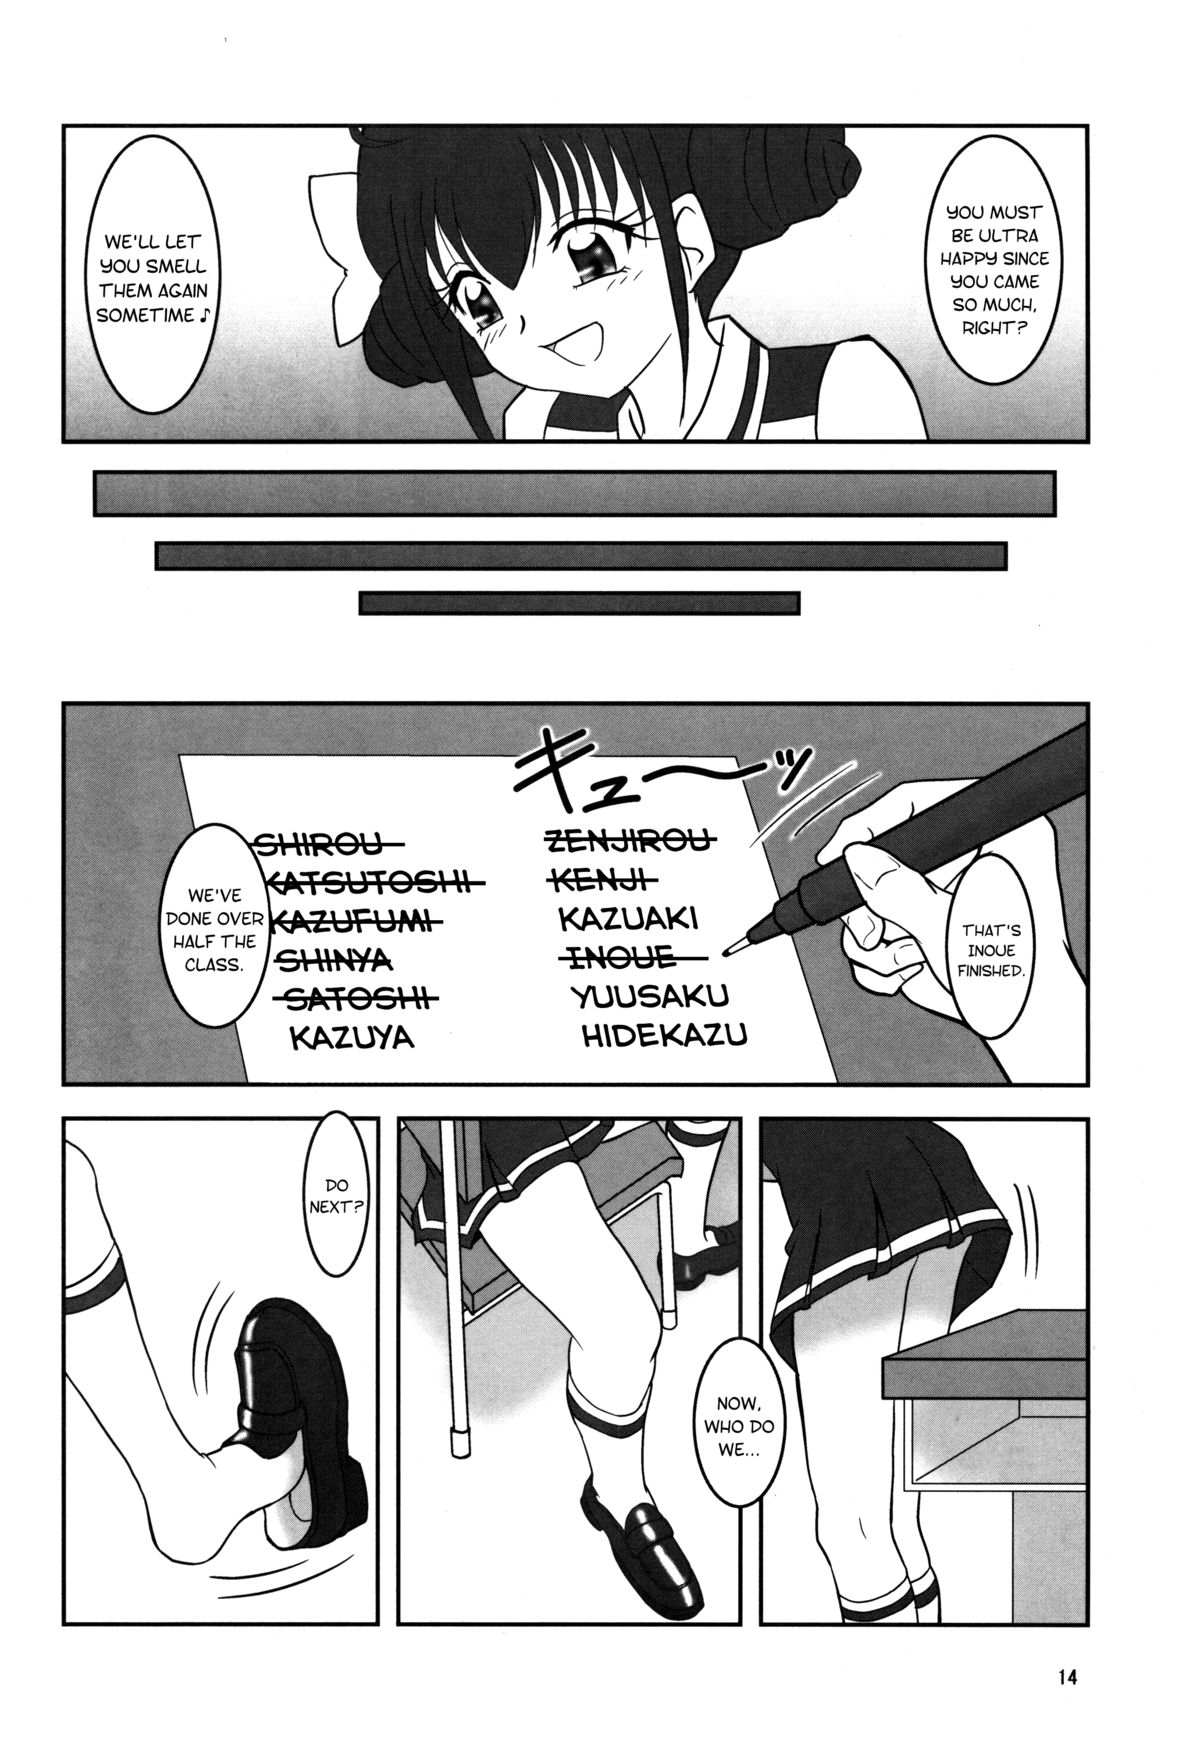 (C82) [AFJ (Ashi_O)] Smell Zuricure | Smell Footycure (Smile Precure!) [English] page 15 full